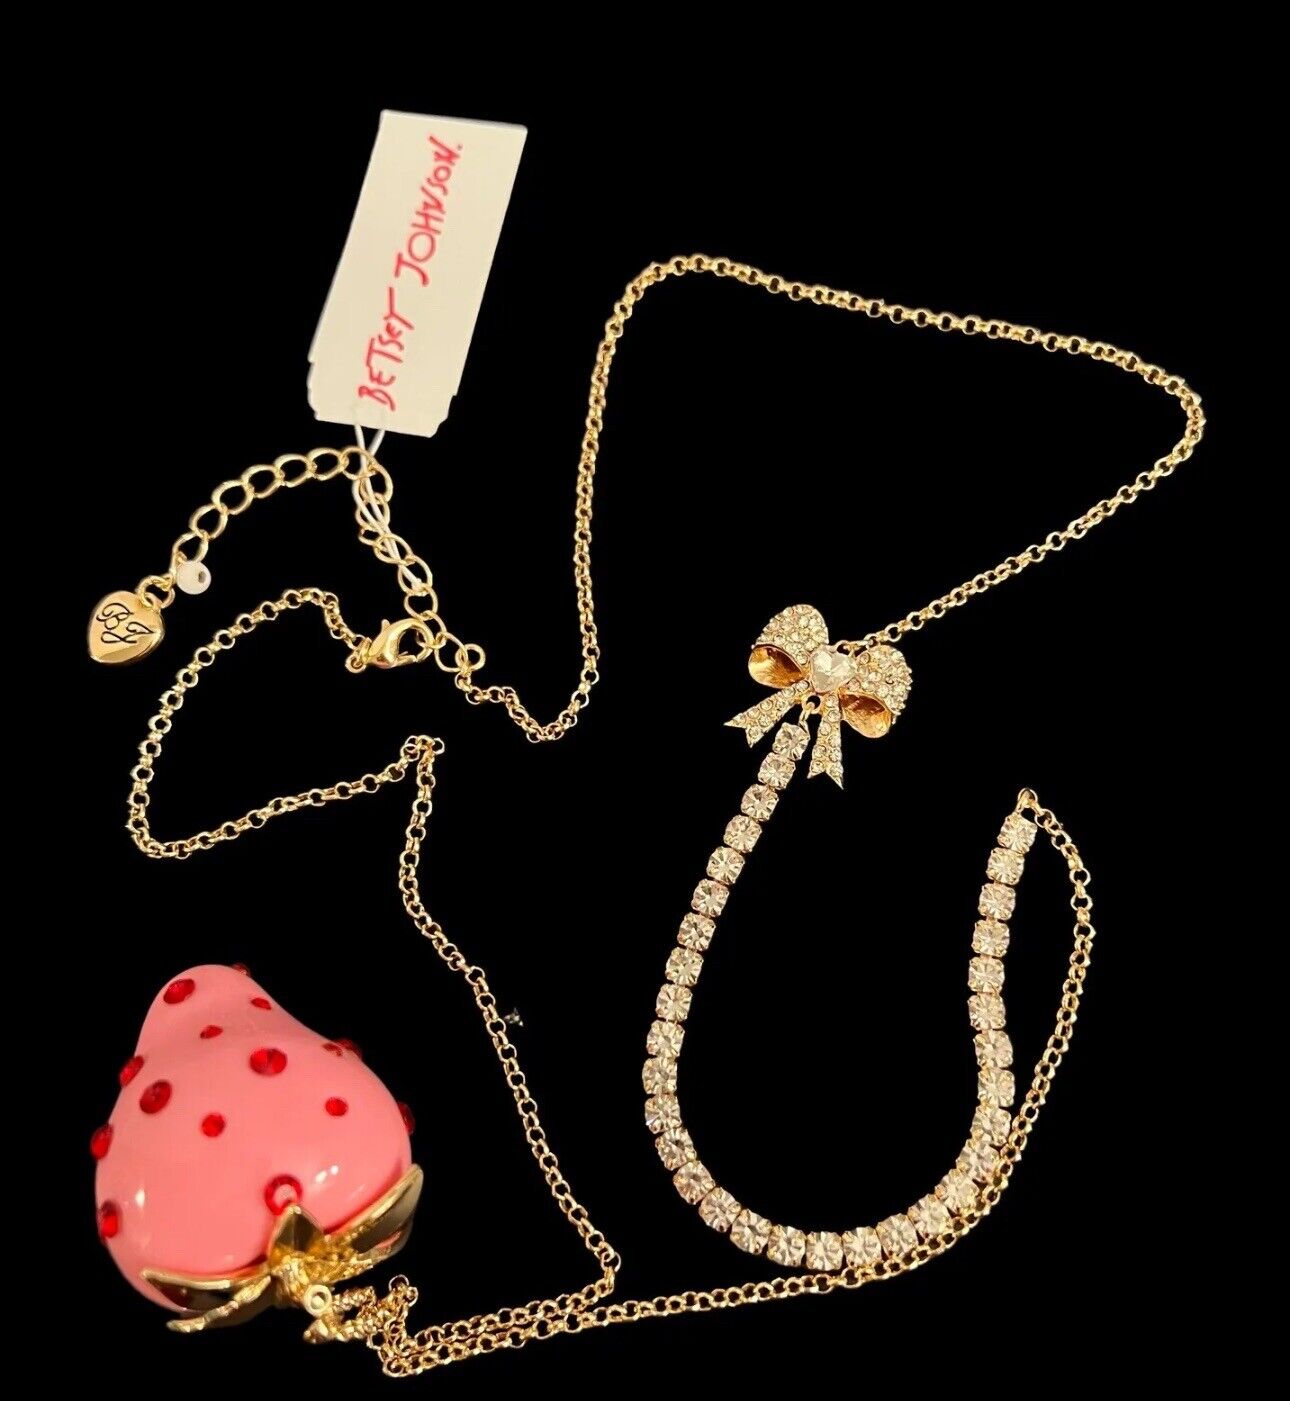 NWT Betsey Johnson Gold Plated Crystals Strawberry Long Necklace Pink Babycakes